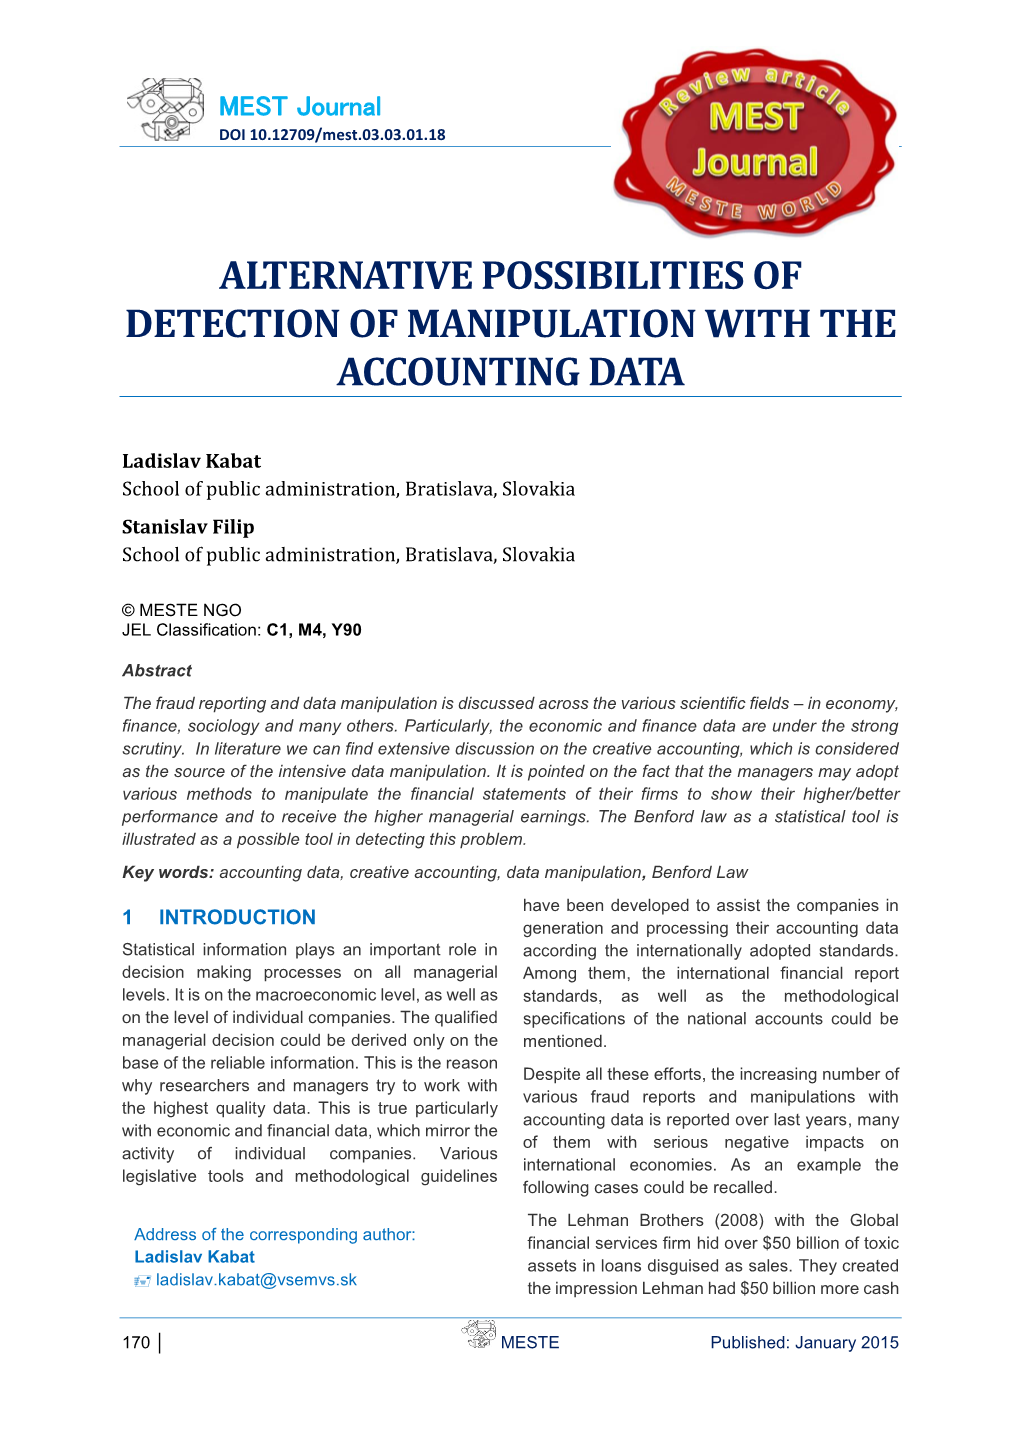 Alternative Possibilities of Detection of Manipulation with the Accounting Data